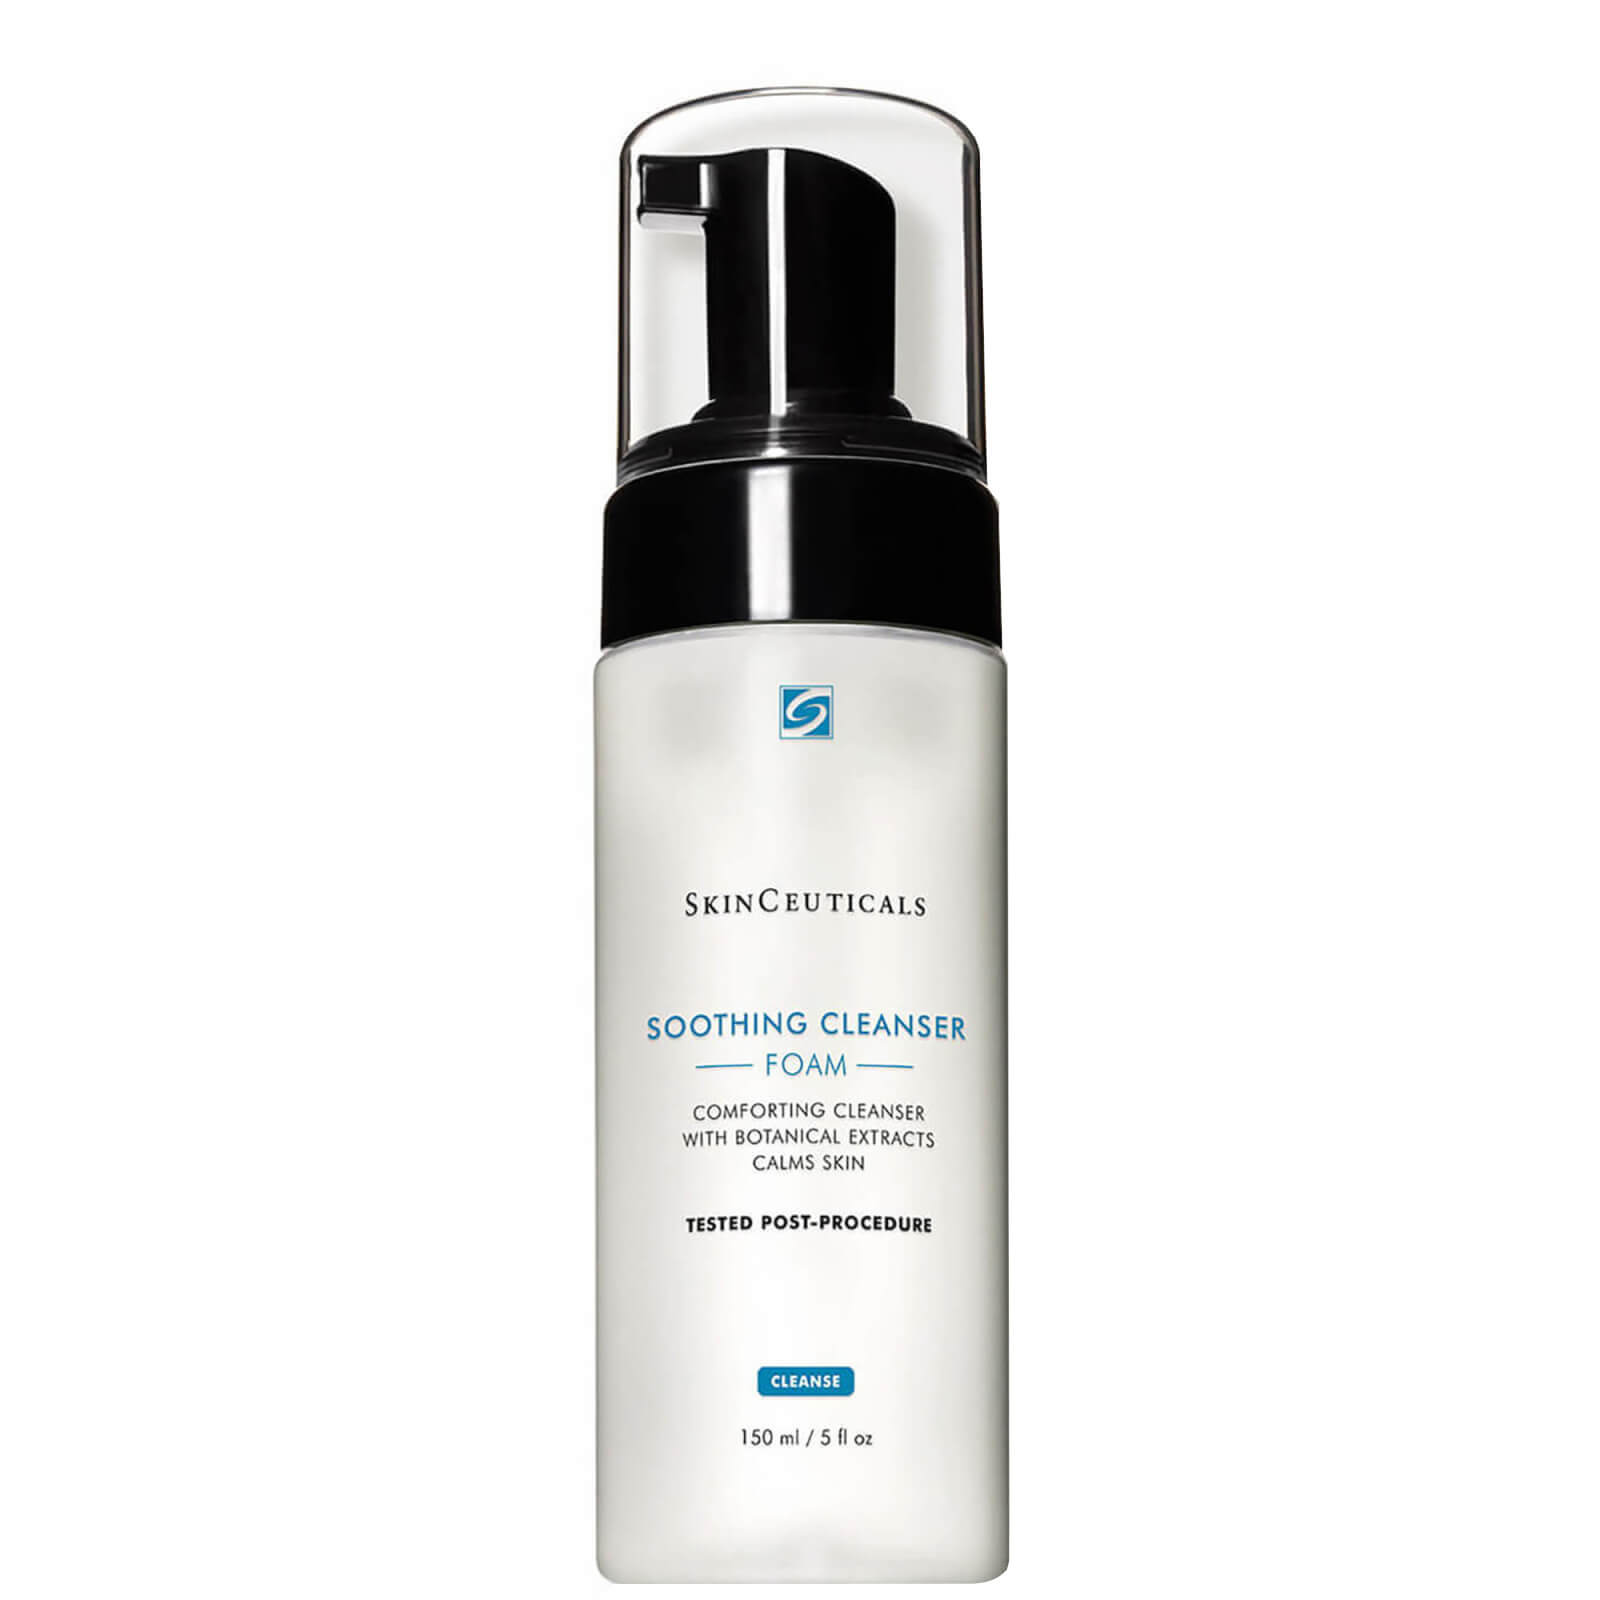 SKINCEUTICALS SKINCEUTICALS SOOTHING CLEANSER (5 FL. OZ.)